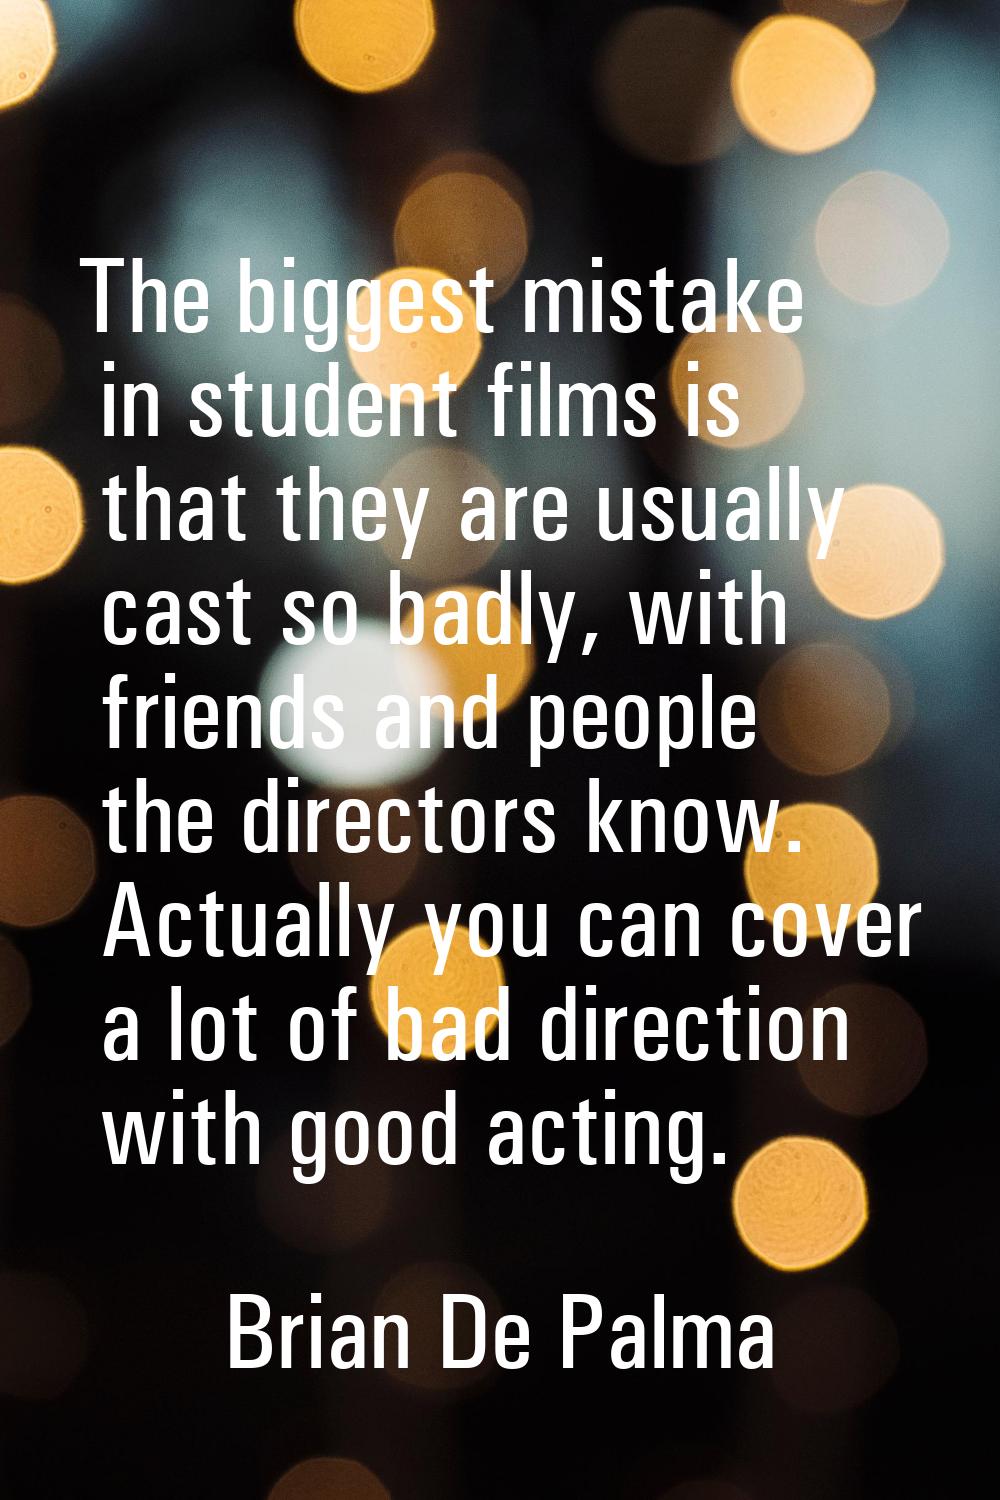 The biggest mistake in student films is that they are usually cast so badly, with friends and peopl